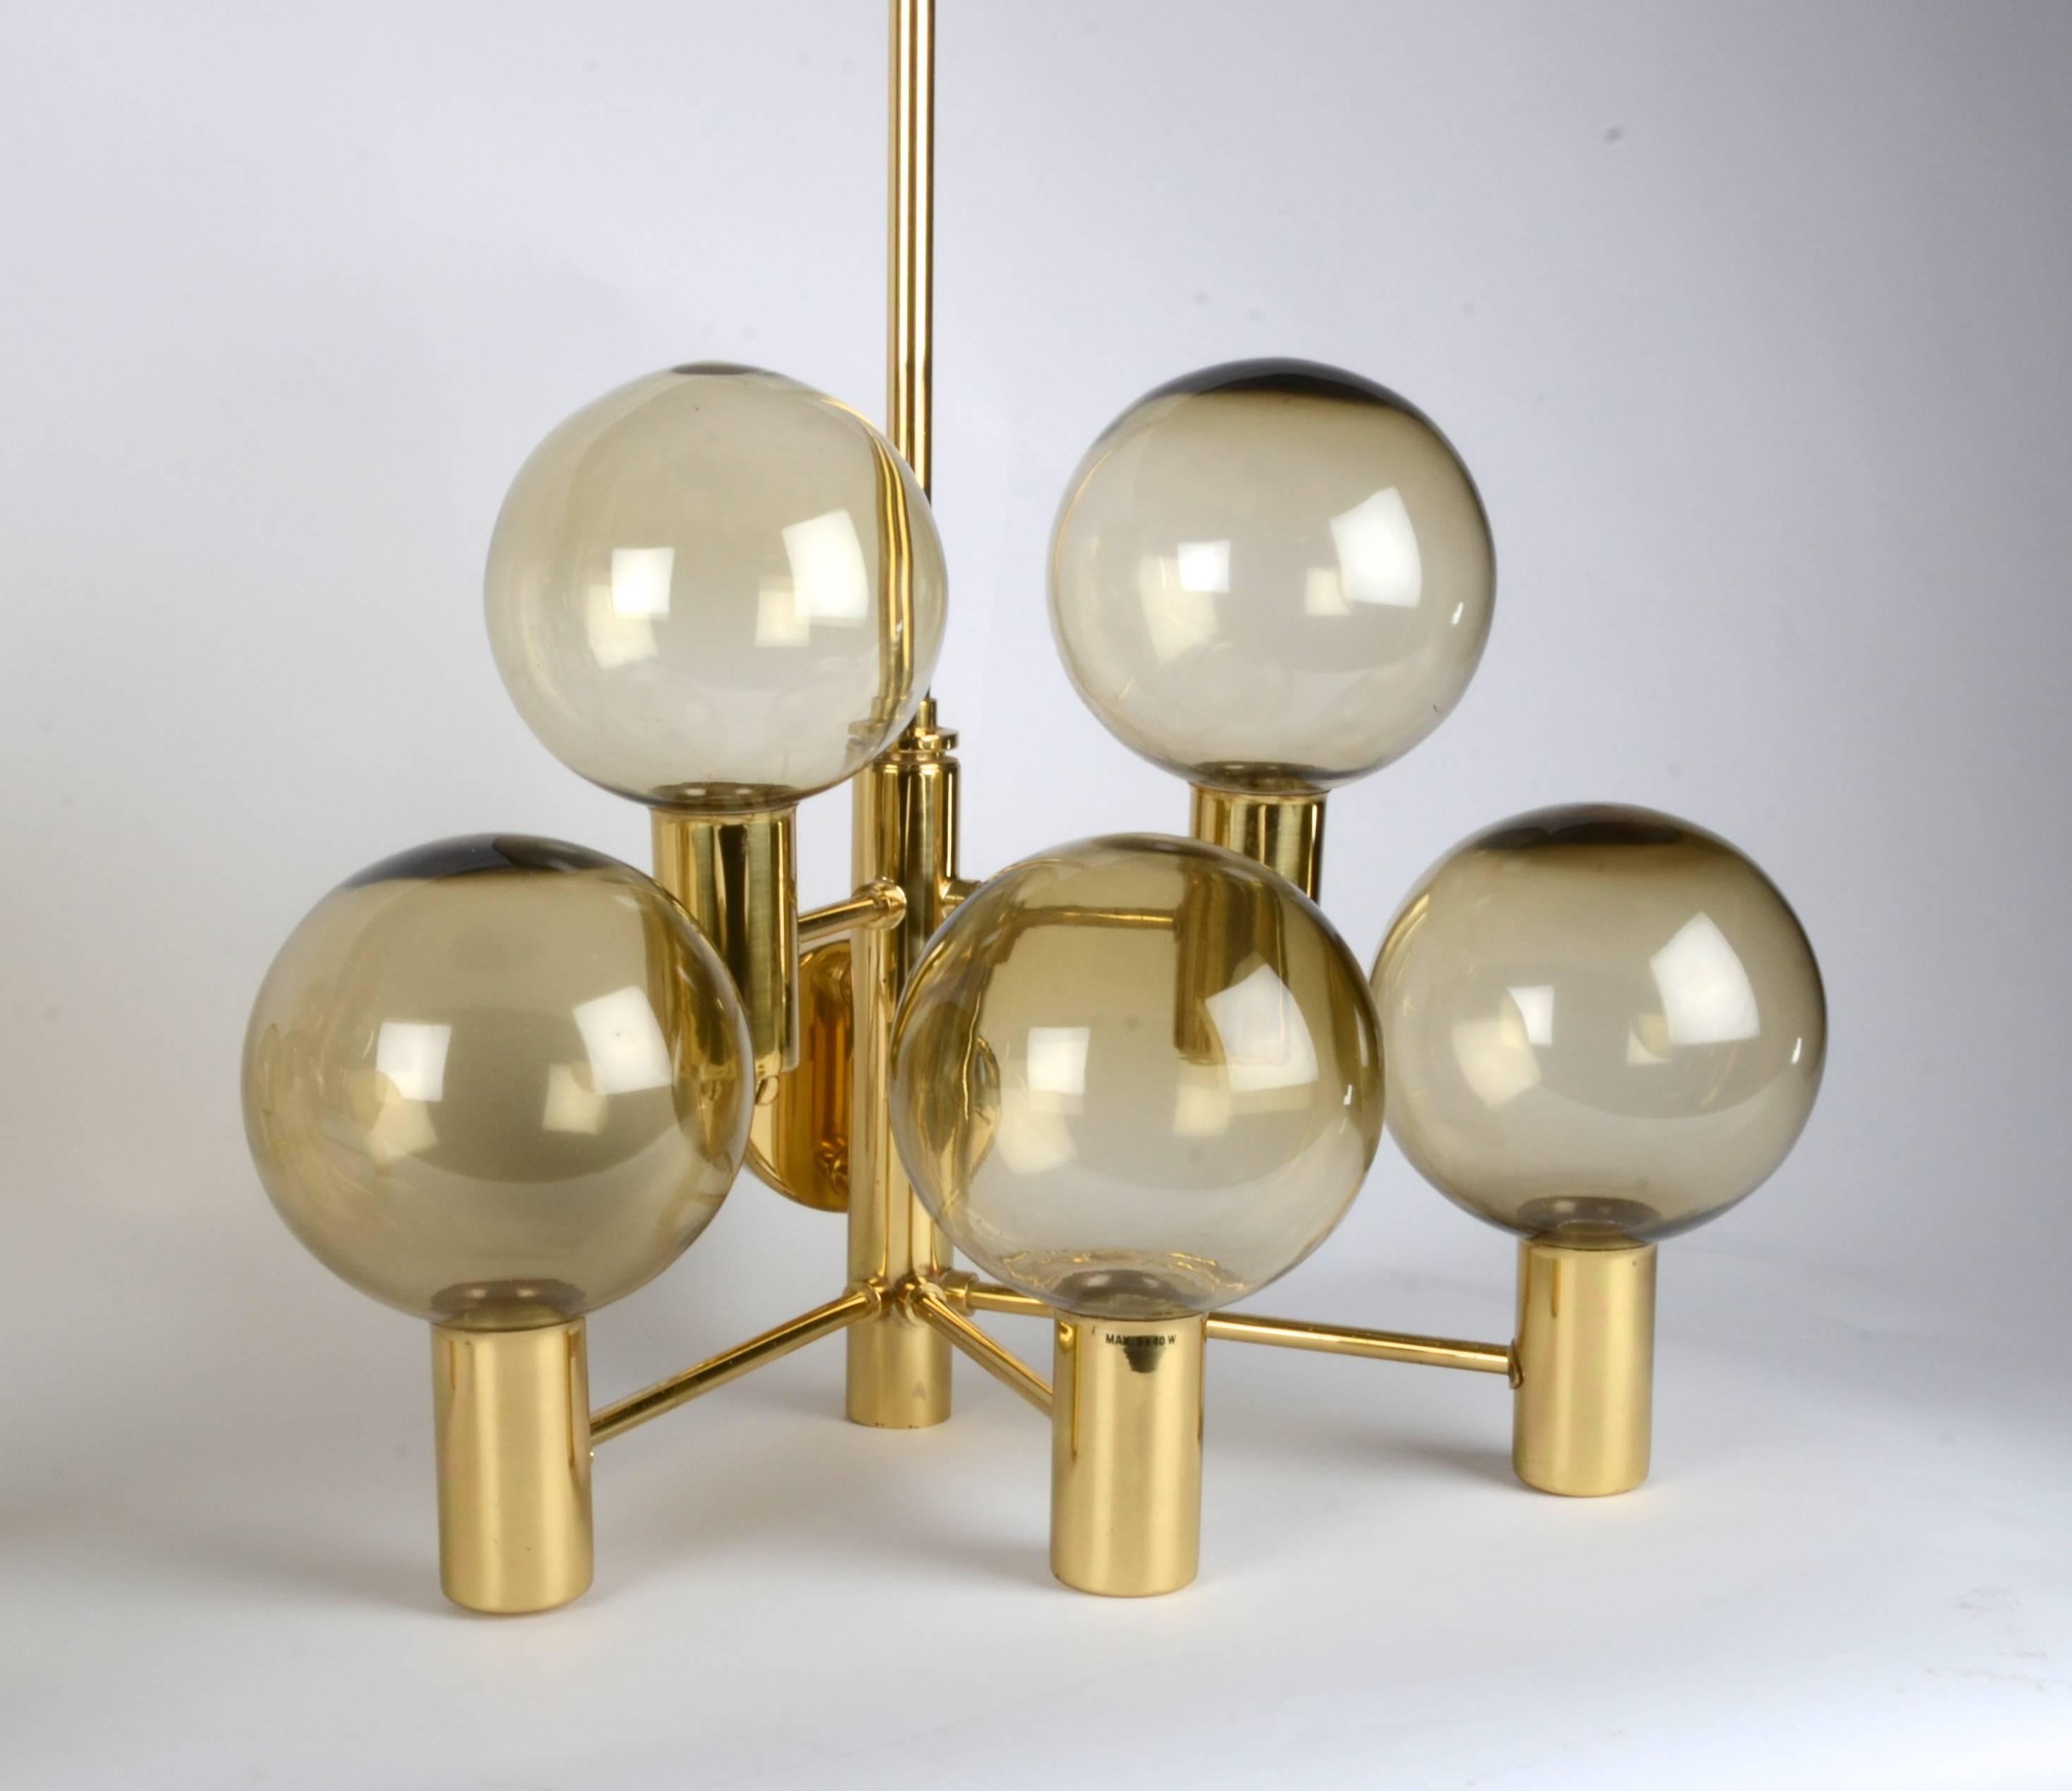 A pair of wall fixtures in brass with glass shades. Designed by Hans-Agne Jakobsson for Markaryd, Sweden, 1960s-1970s.

Four pieces available.